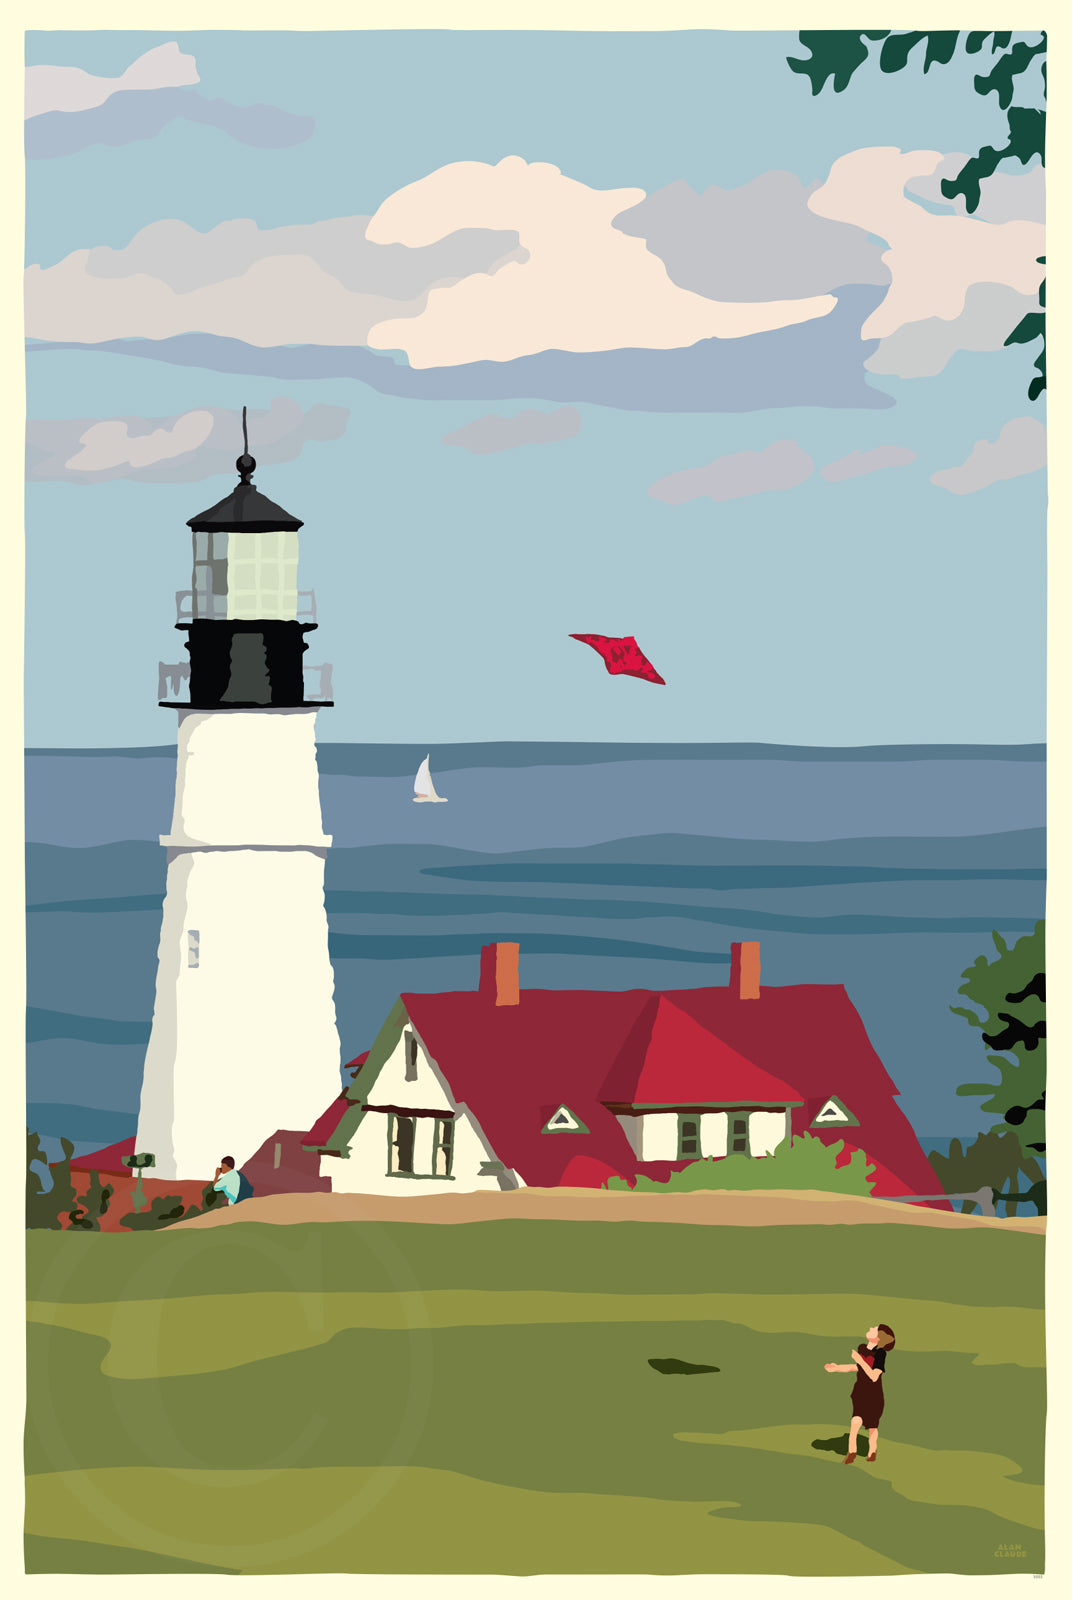 Fly Kite Fly At Portland Head Light Art Print 24" x 36" Travel Poster By Alan Claude - Maine